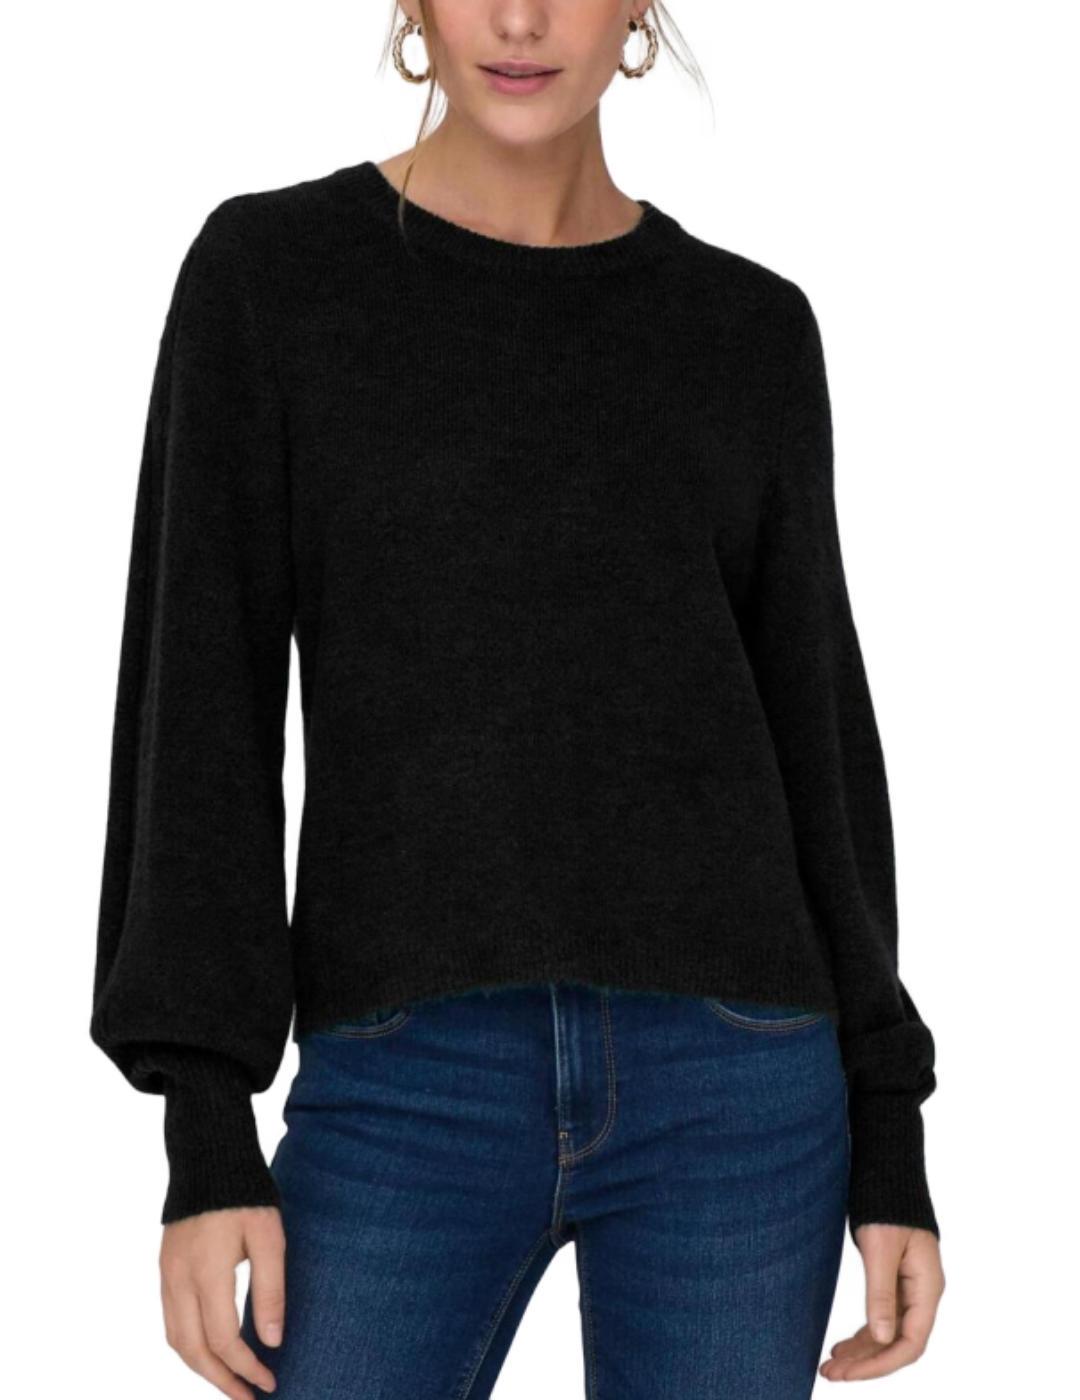 Only JERSEY NEGRO PULLOVER MUJER 15277924 Negro - textil Chaquetas de punto  Mujer 35,99 €